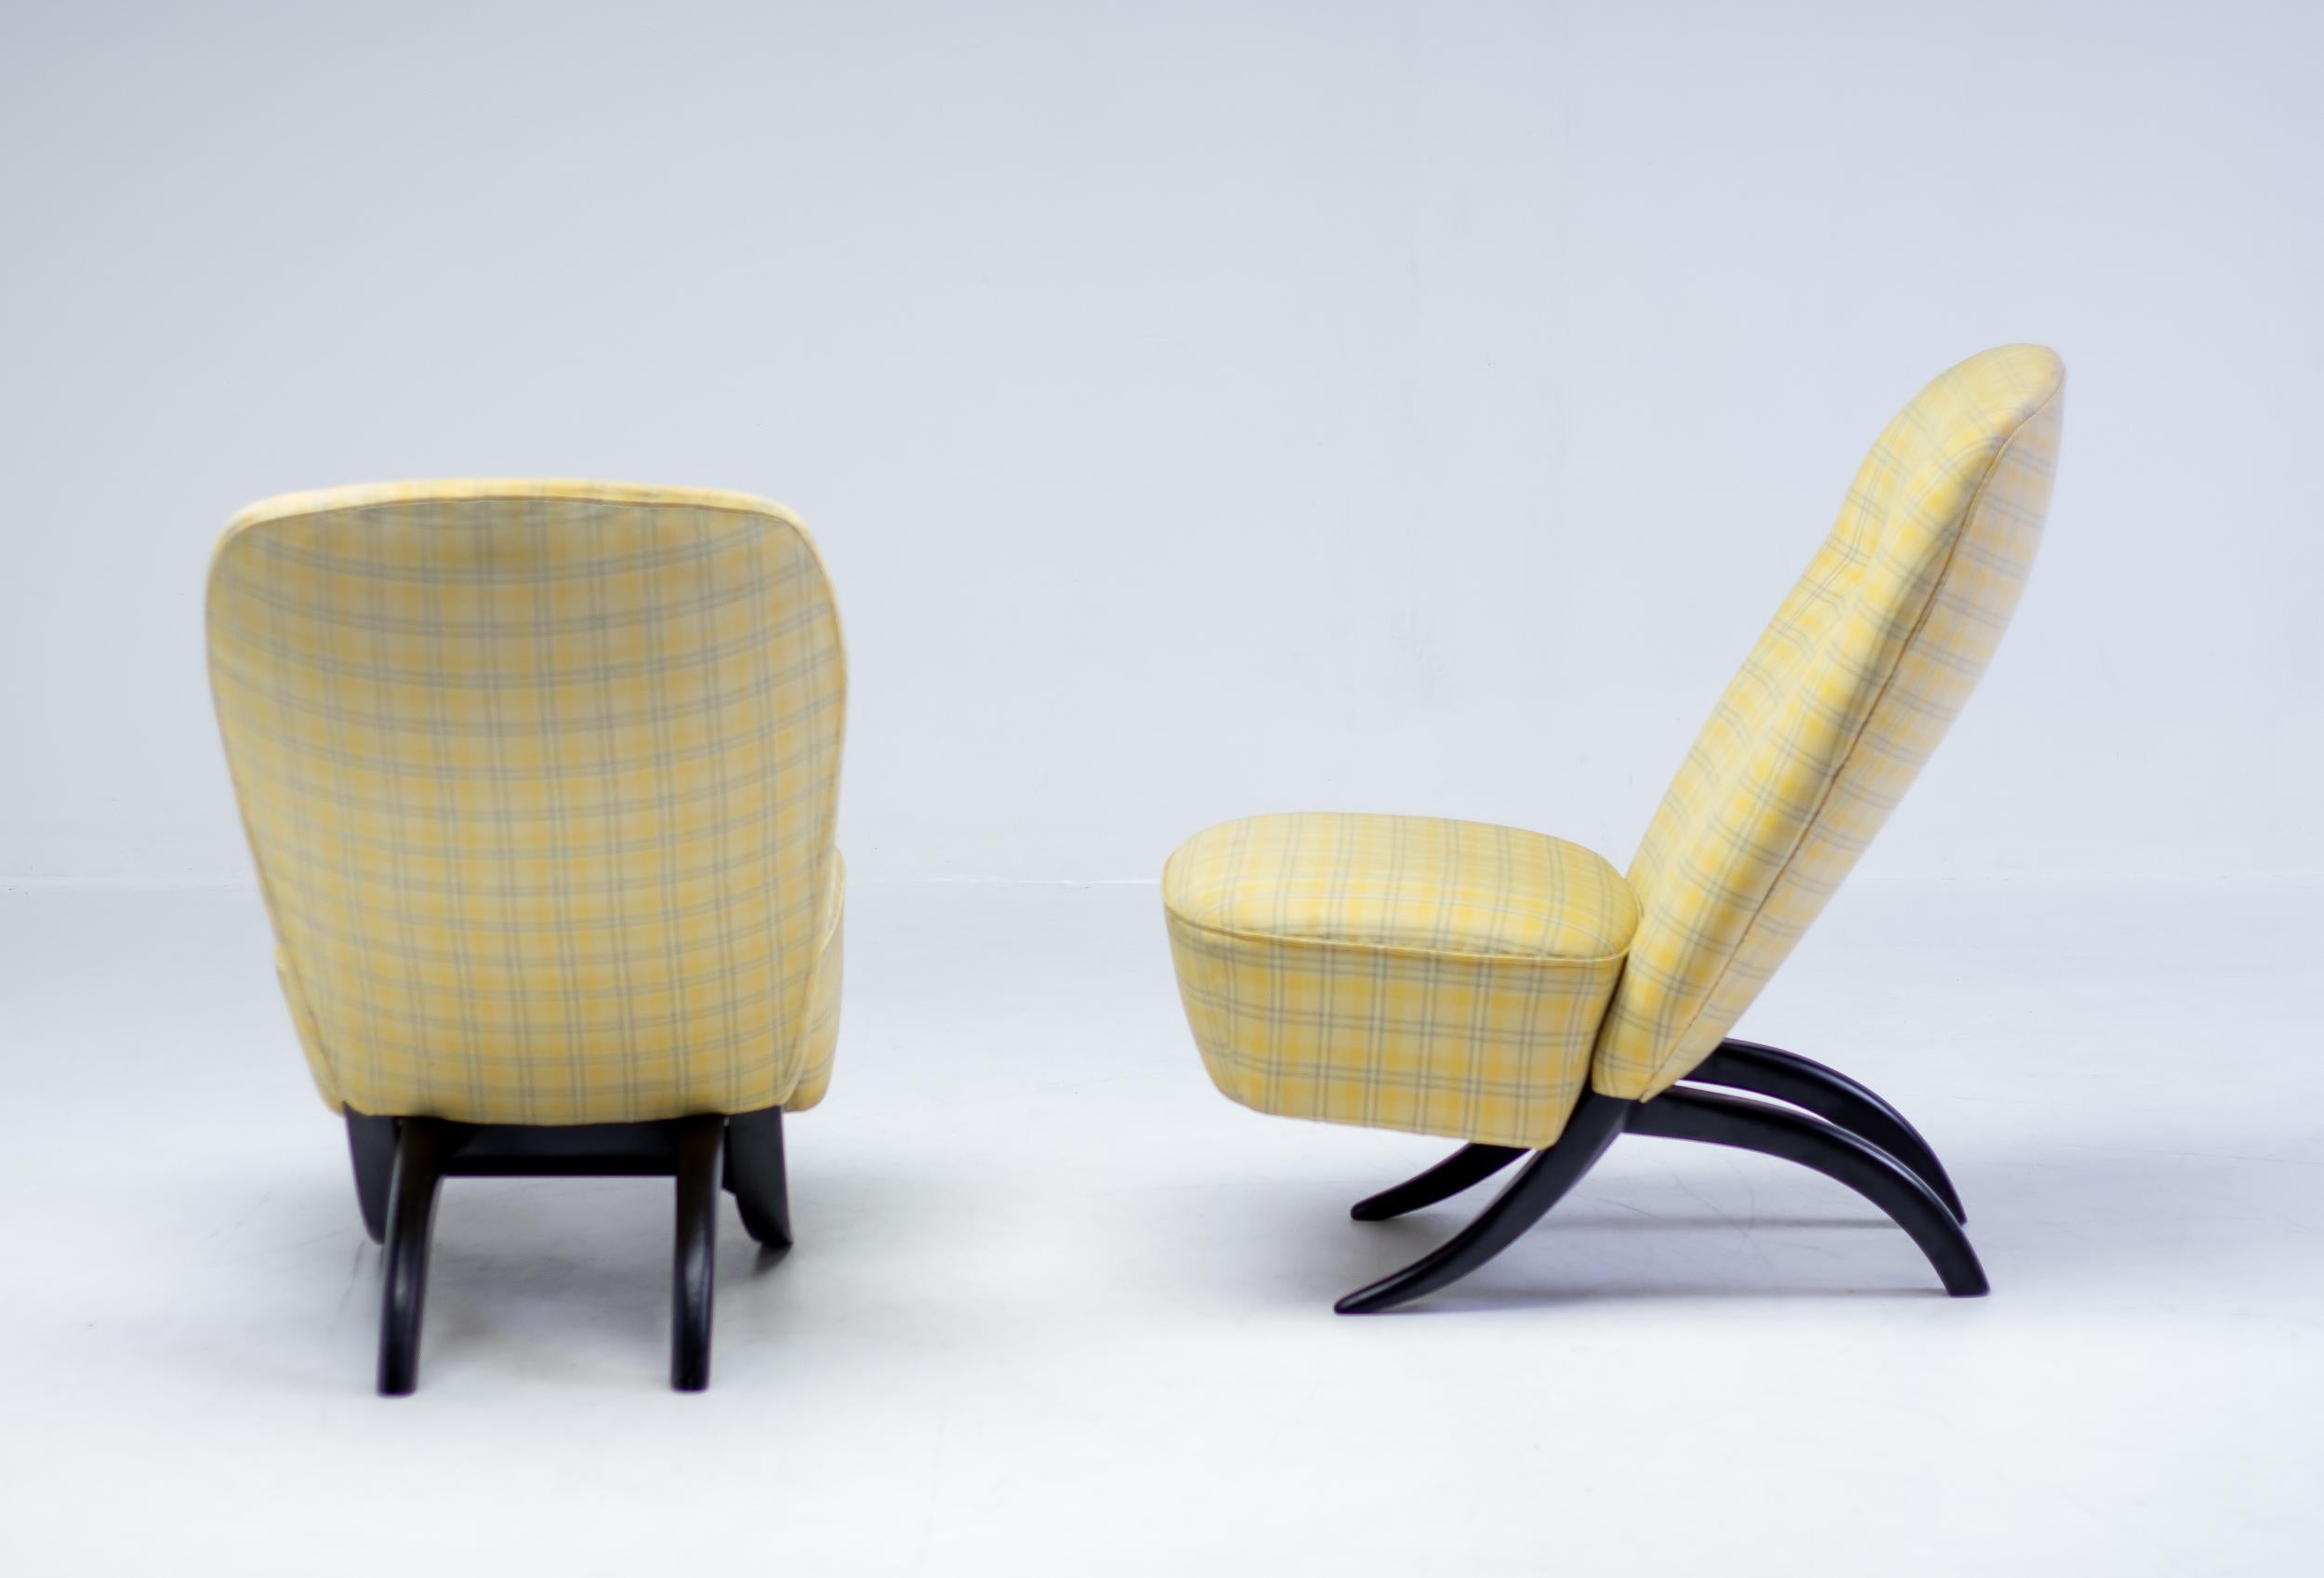 Theo Ruth for Artifort, ‘Congo’ lounge chairs in black lacquered wood and checkered yellow fabric, The Netherlands, 1952. 

These chairs have a unique construction, forced by tension and gravity. The back and seating are two separate elements that